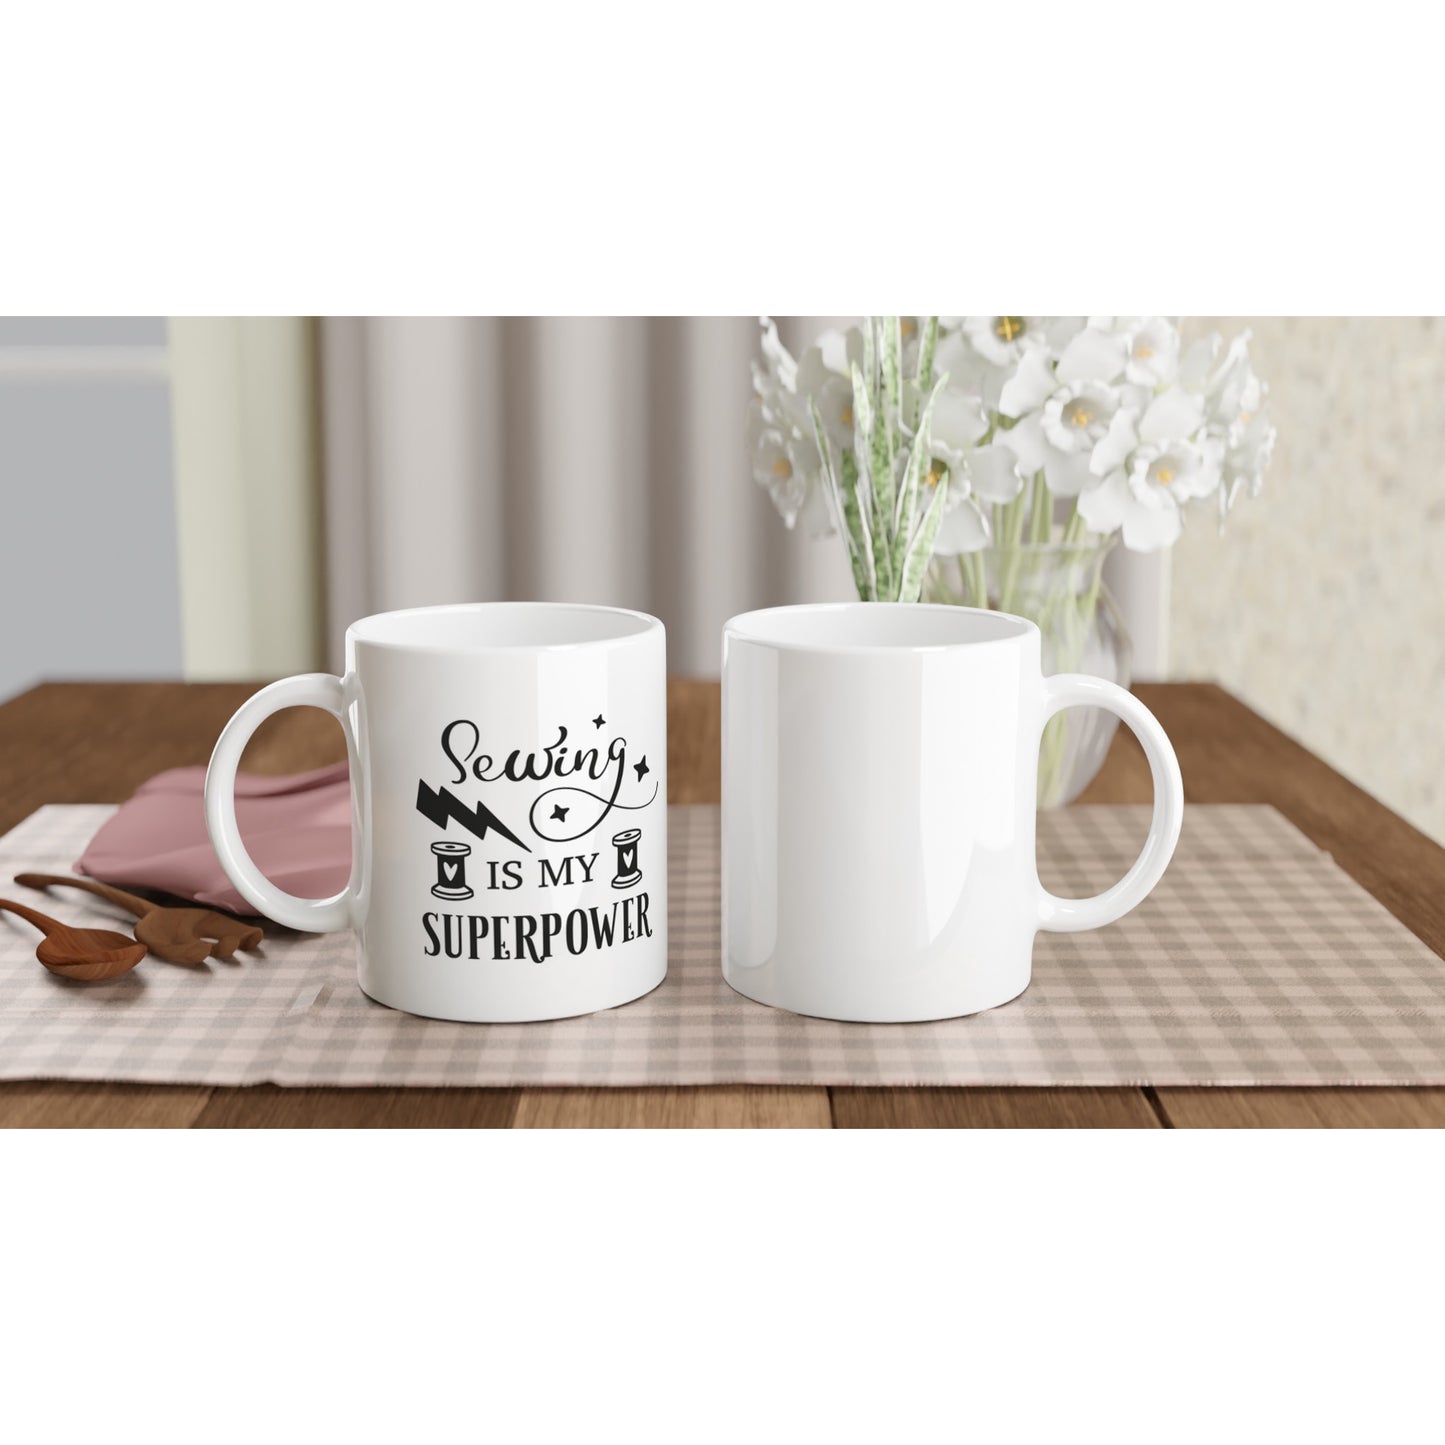 Sewing is My Superpower - Quilters Gift - White 11oz Ceramic Mug